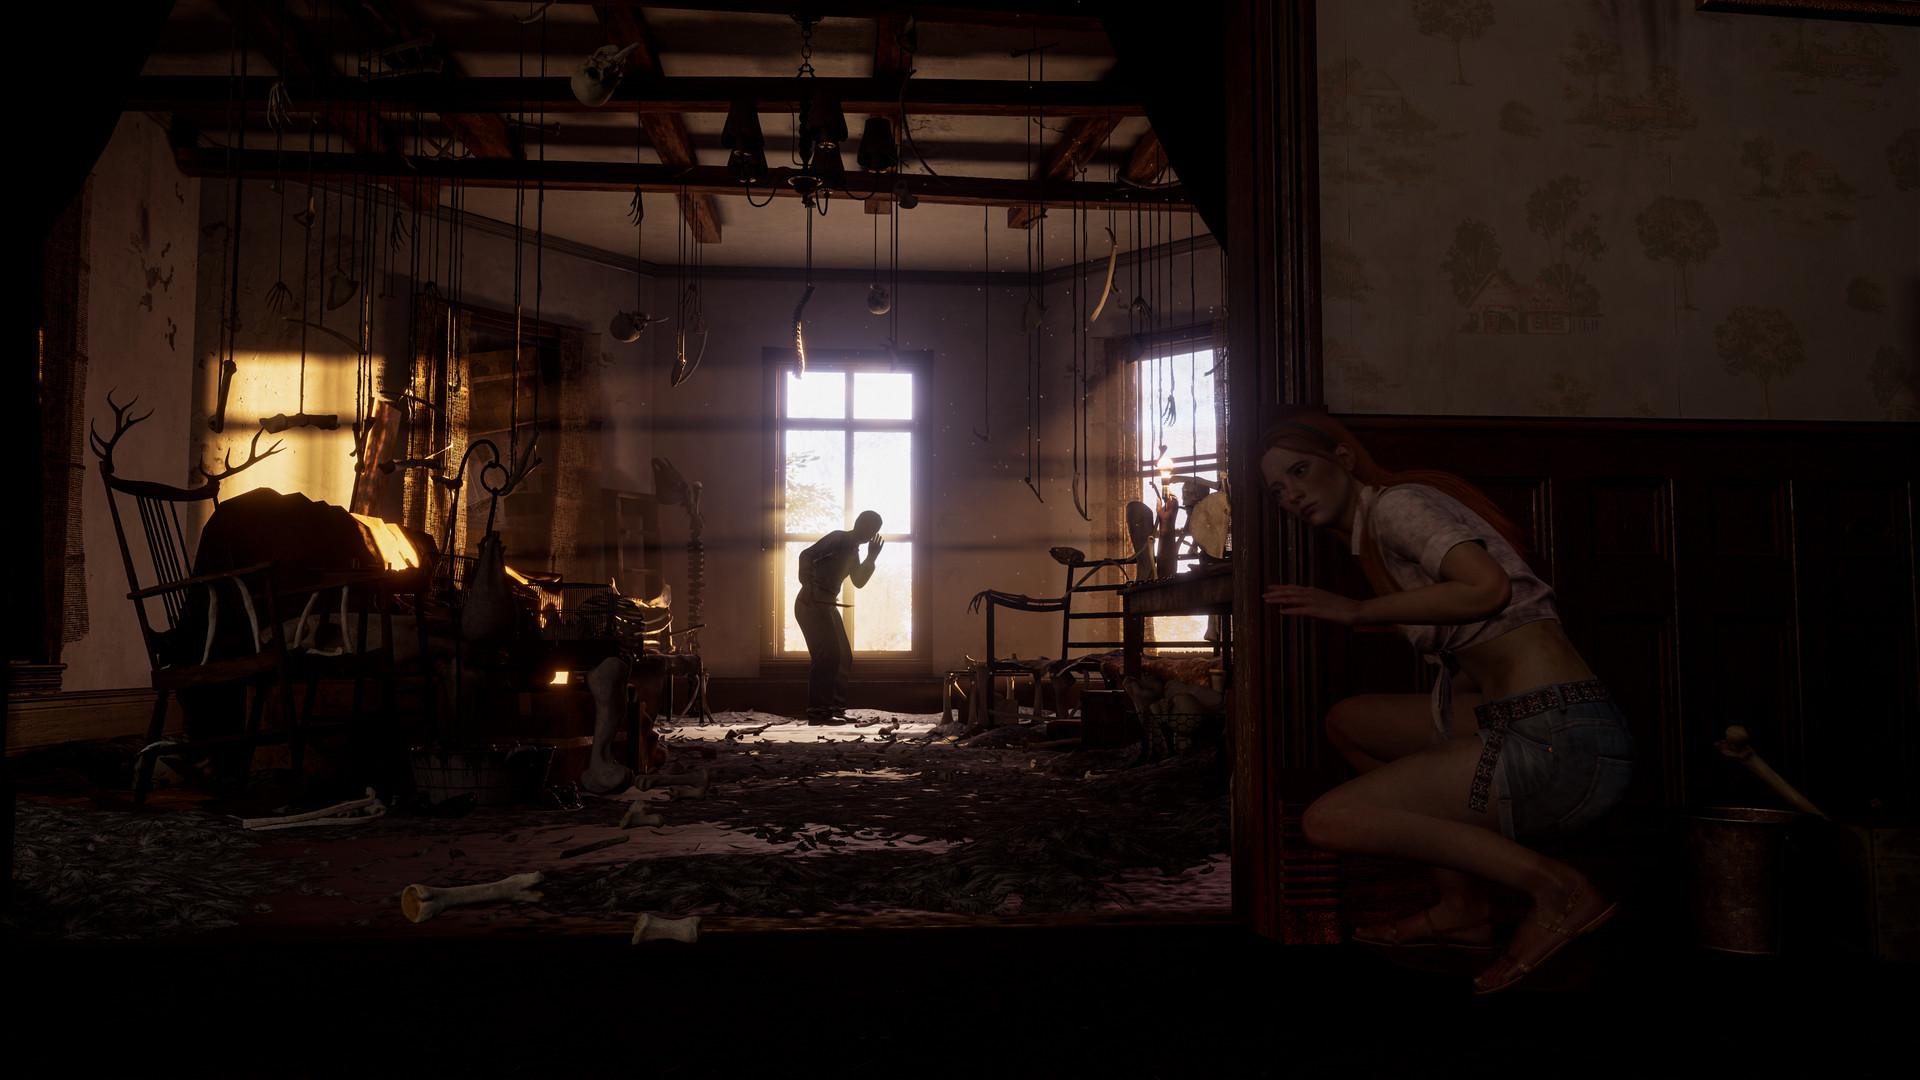 Screenshot №2 from game The Texas Chain Saw Massacre